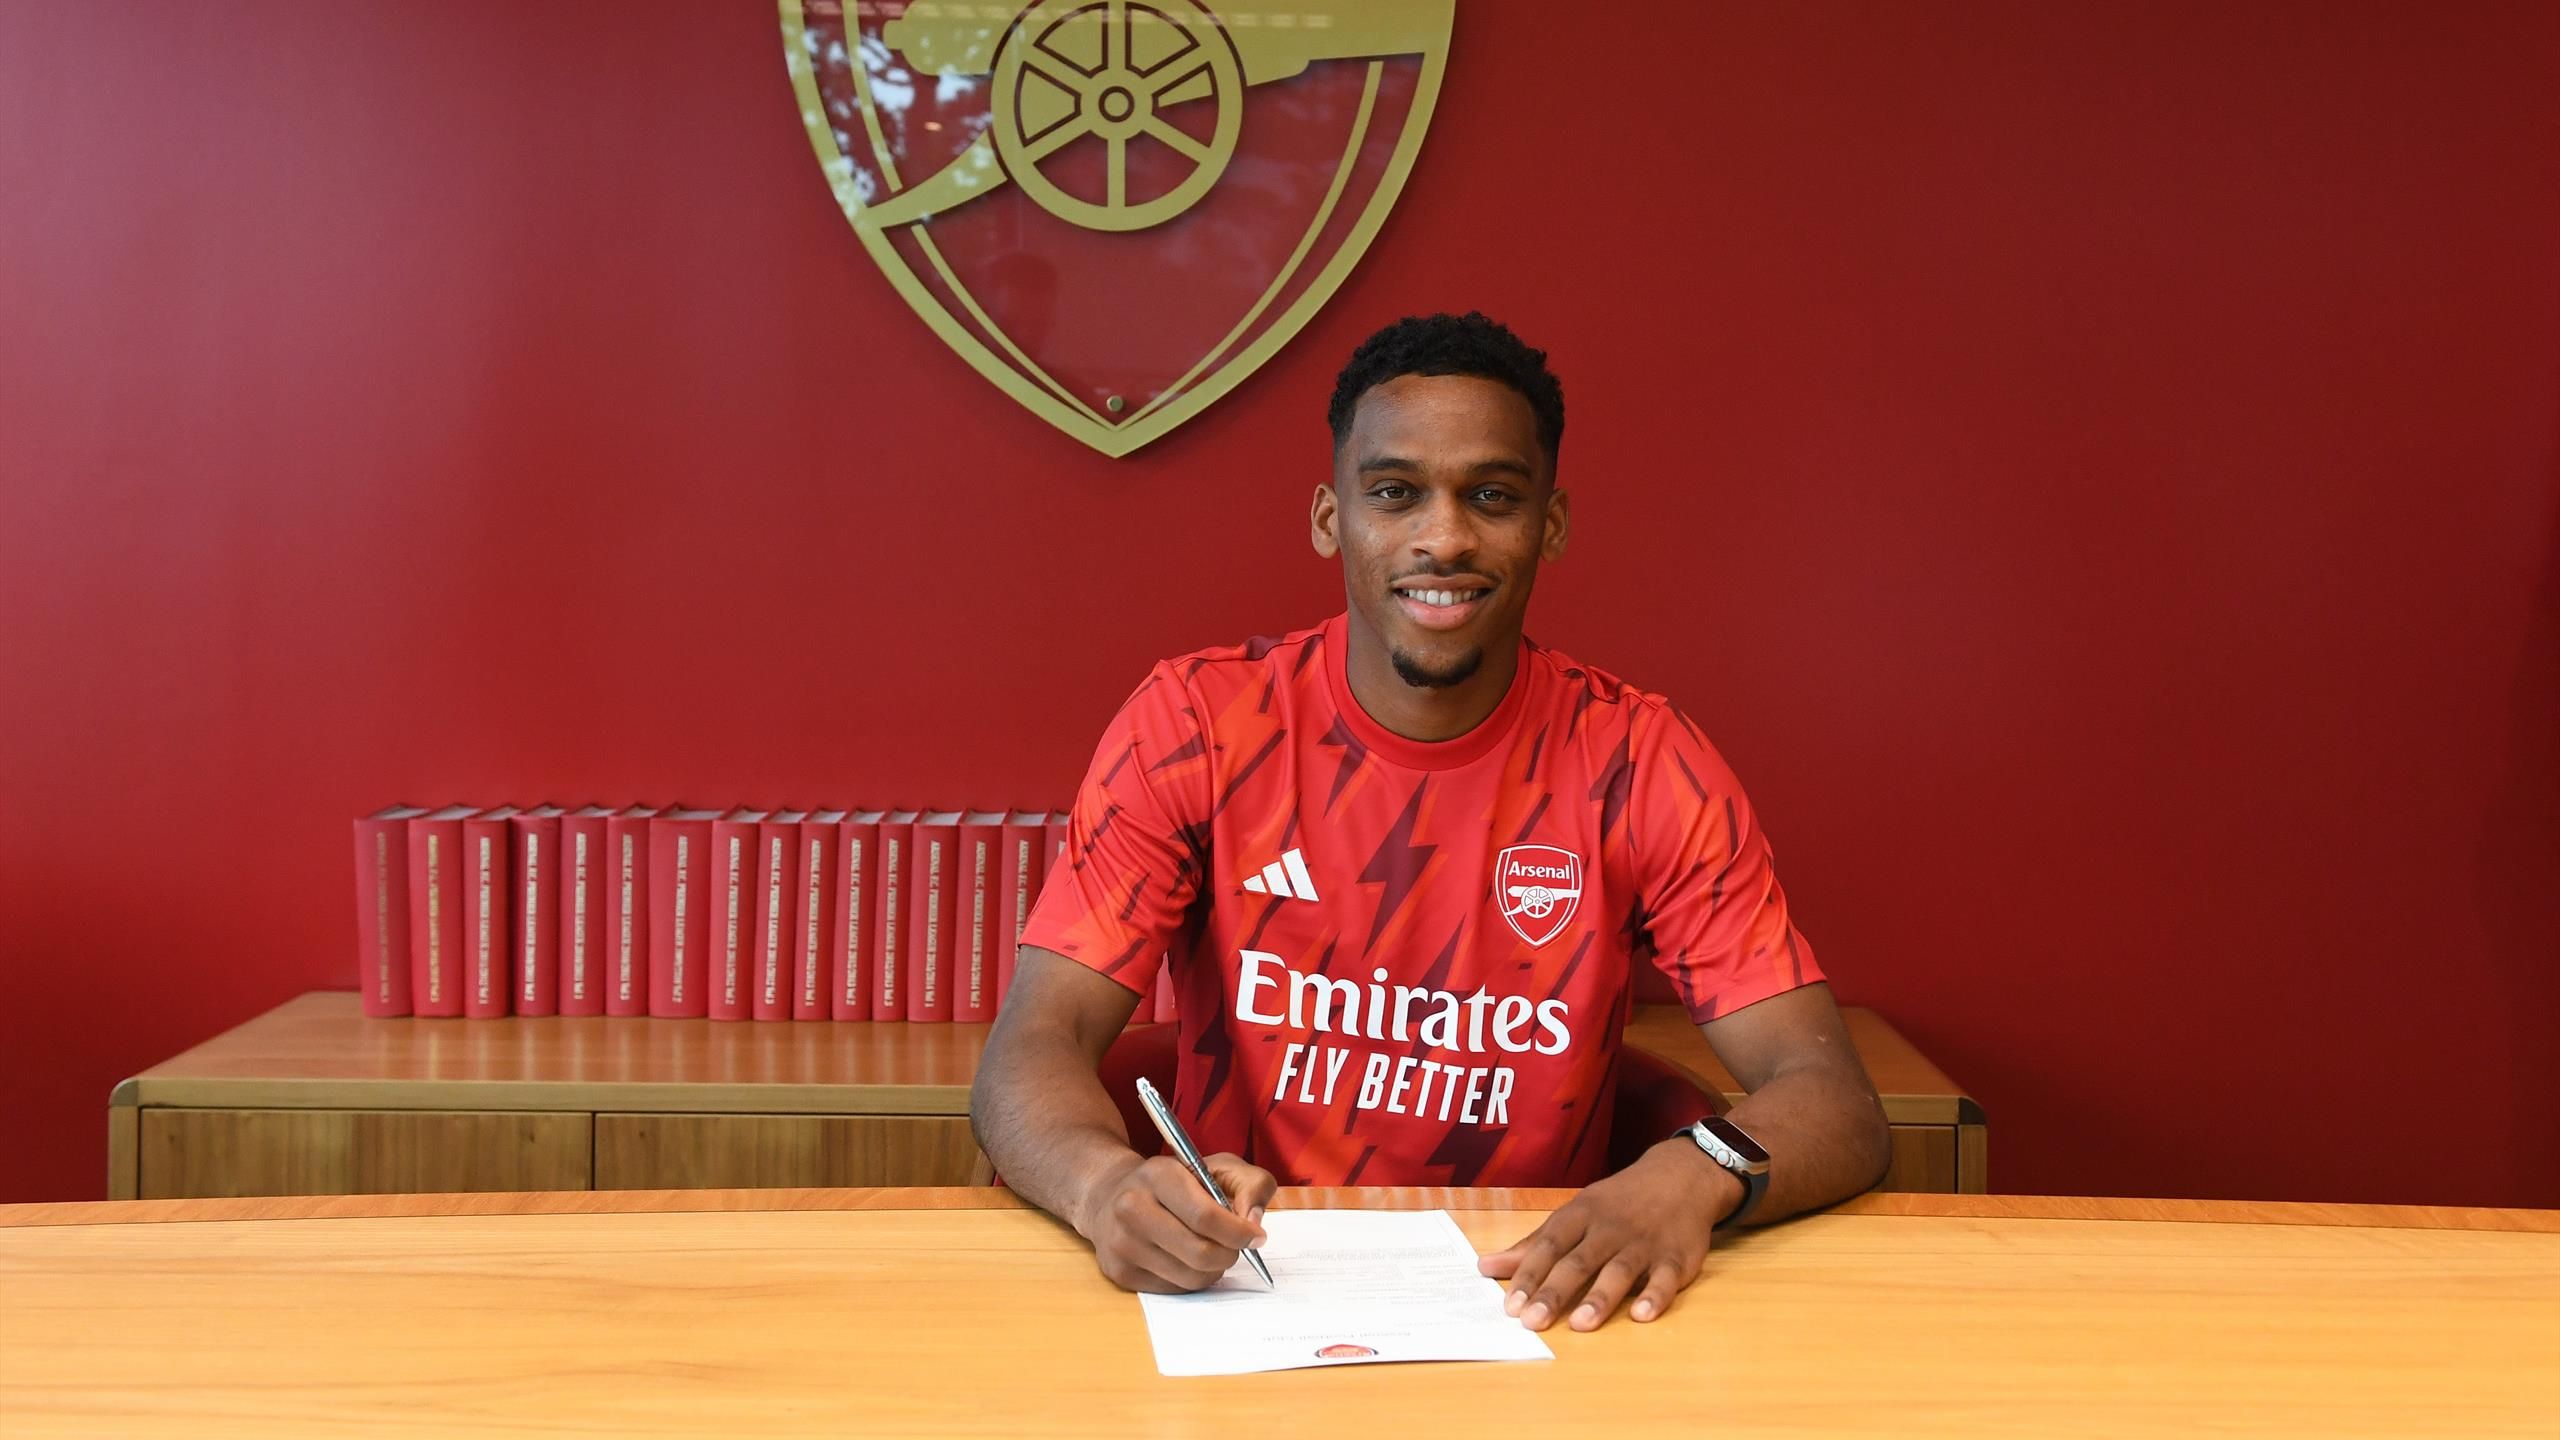 Arsenal sign defender Jurrien Timber from Ajax on multi-year deal